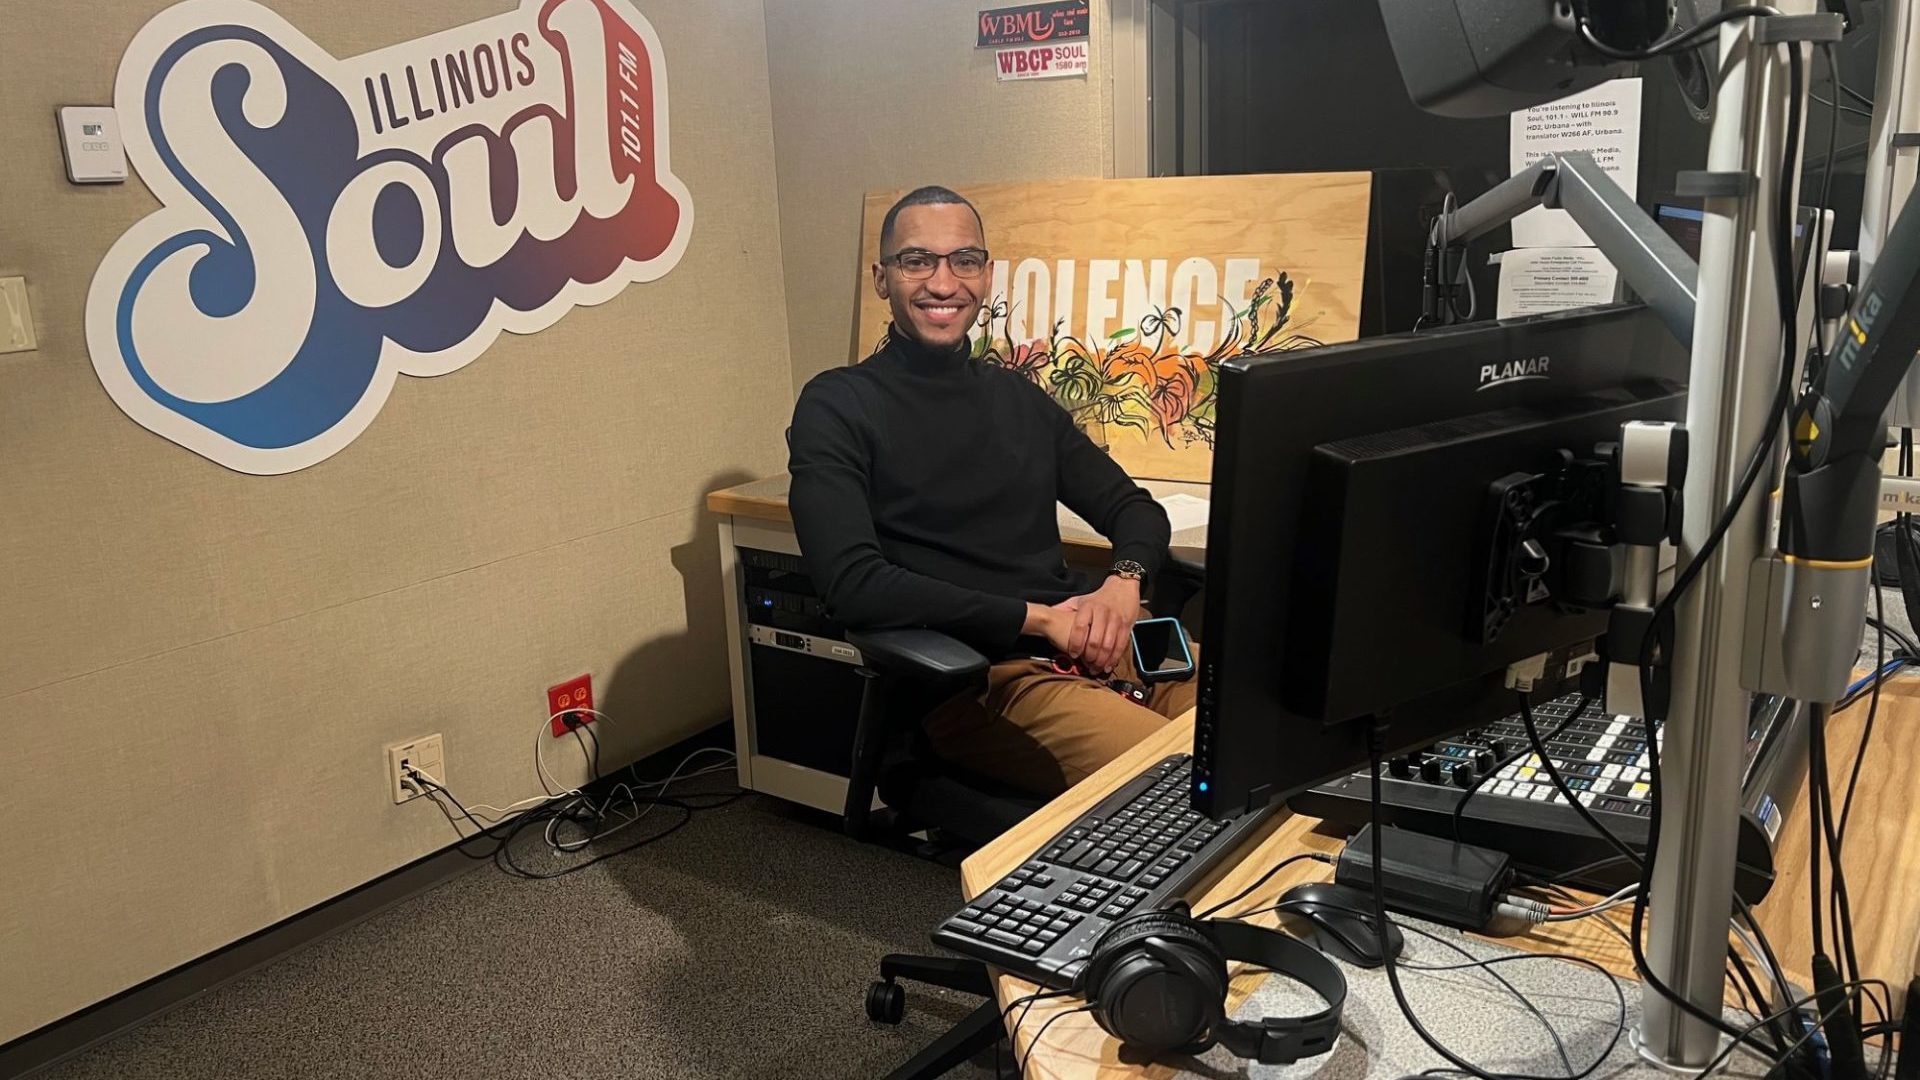 A Black man in a black long-sleeved shirt and glasses is seated at the desk in the Illinois Soul studio.